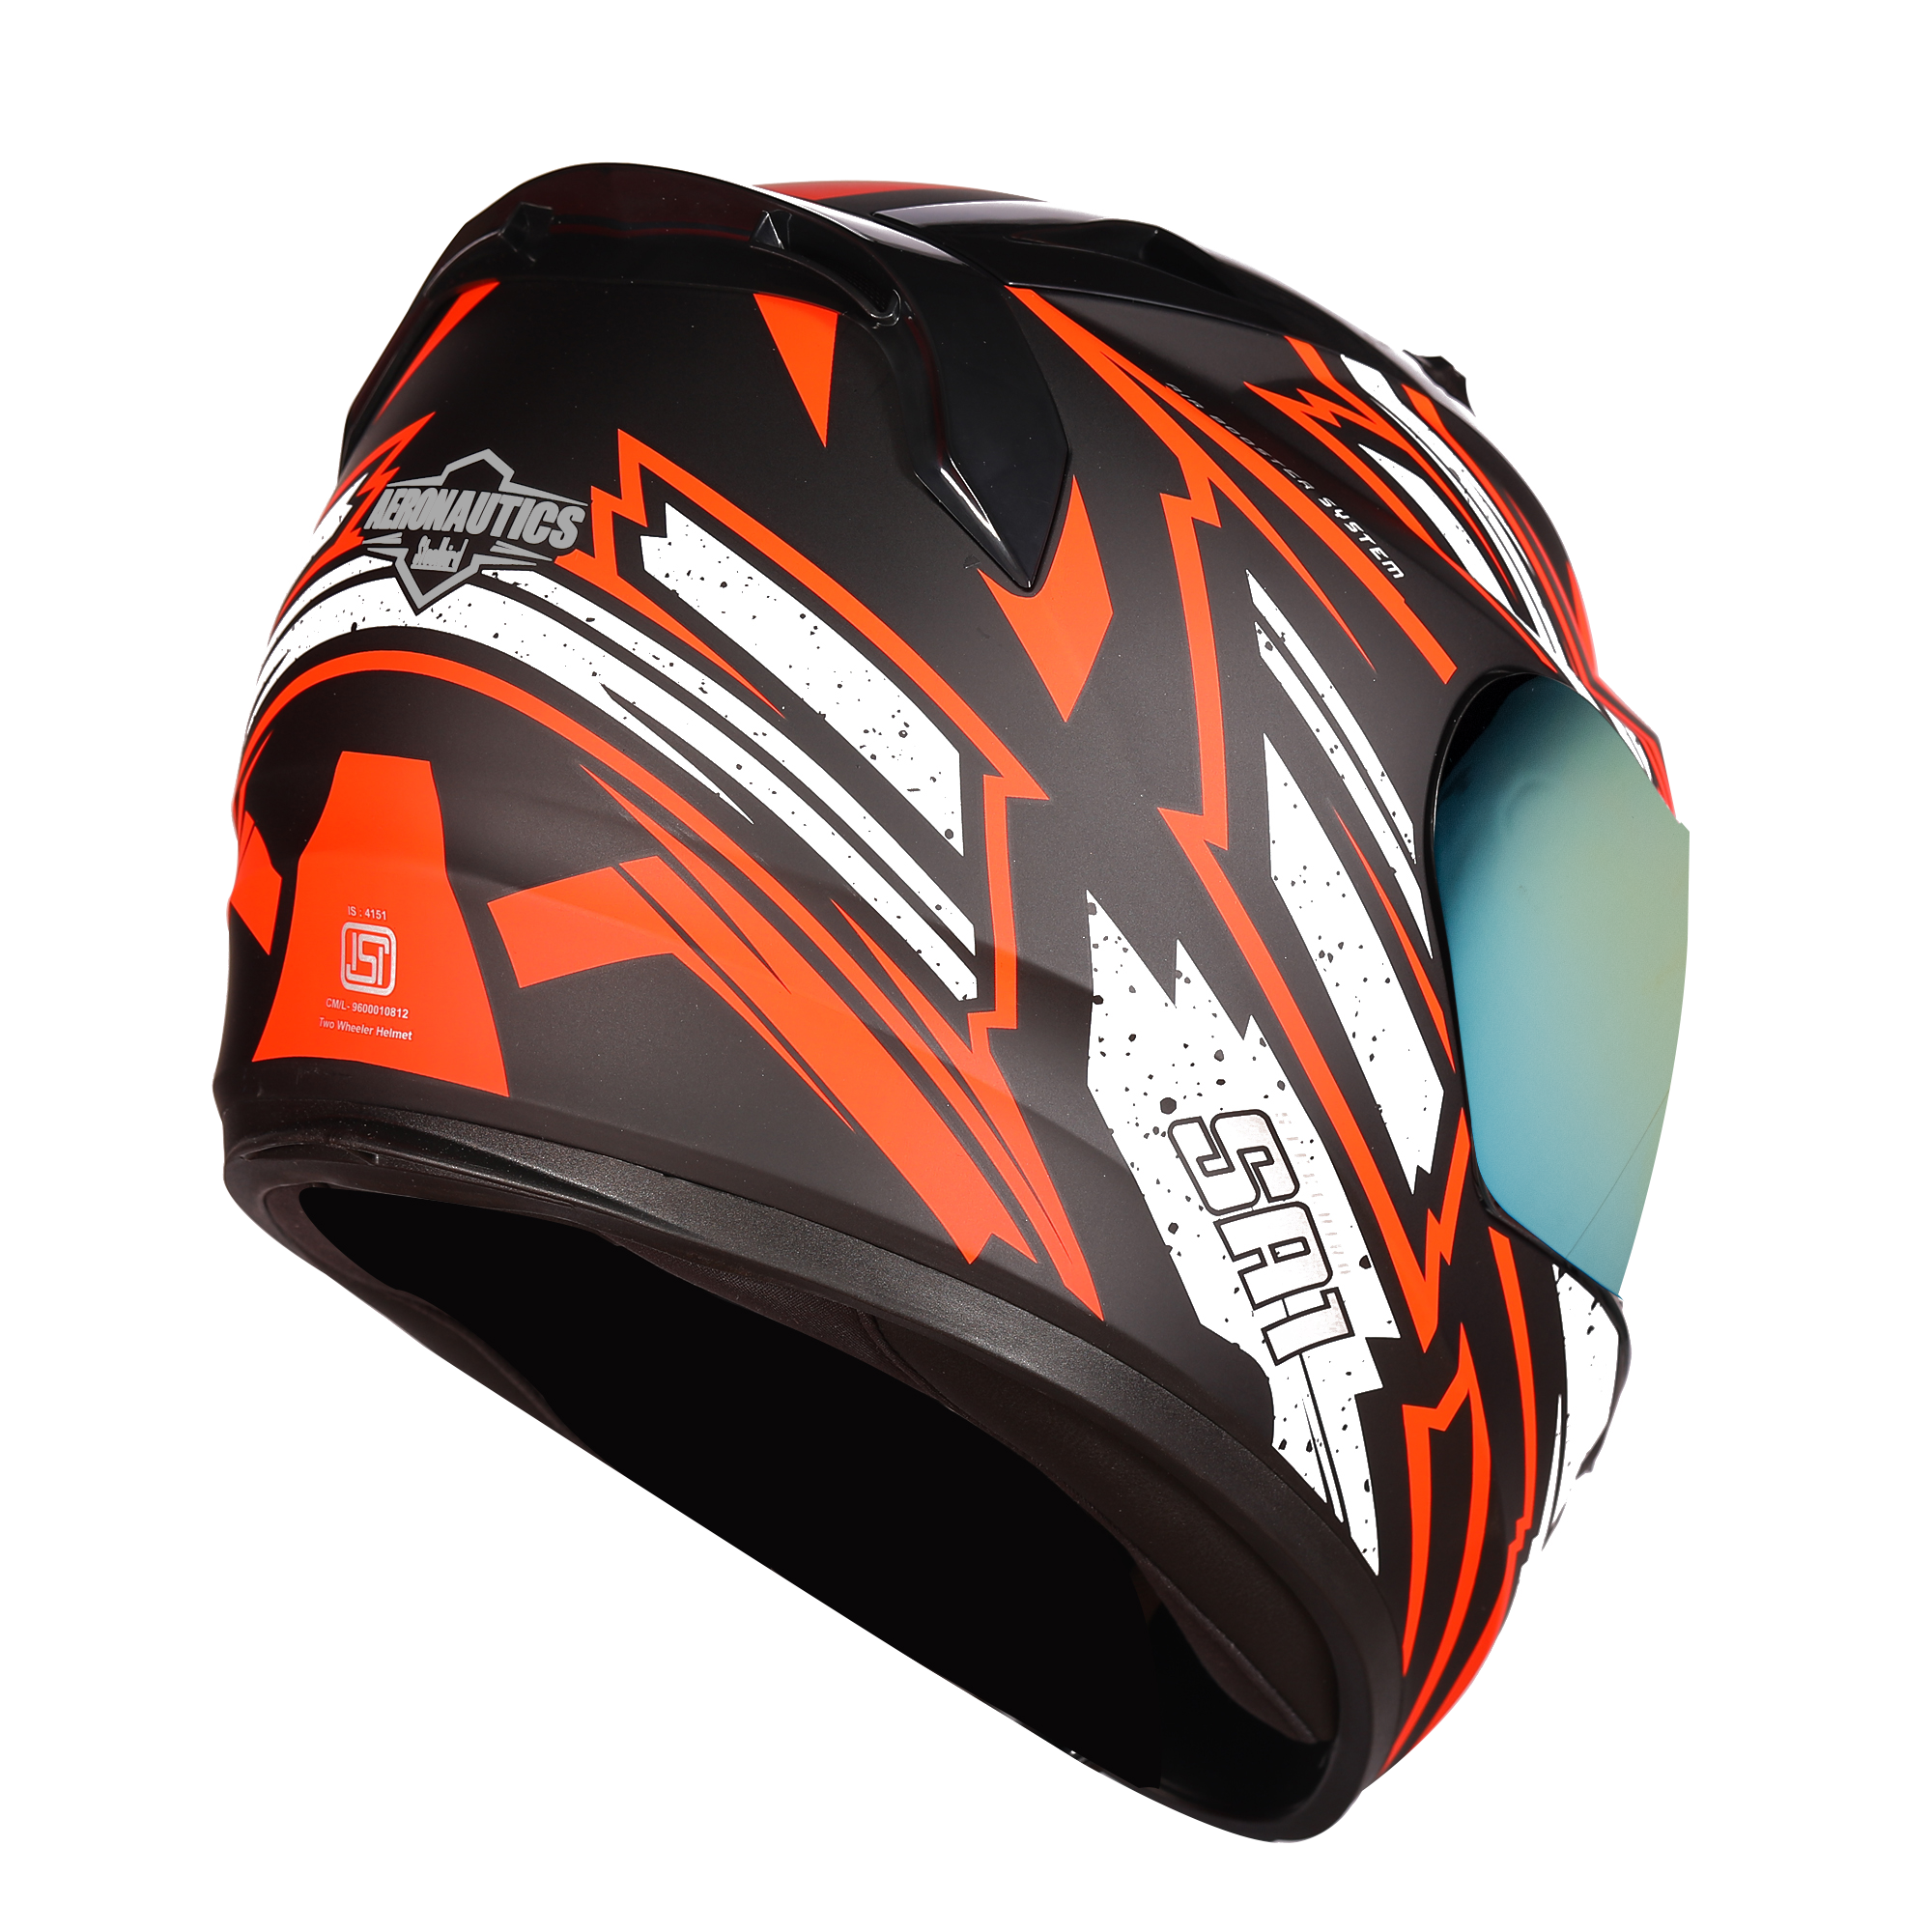 SA-1 BOOSTER MAT BLACK WITH ORANGE - CHROME GOLD VISOR (WITH EXTRA CLEAR VISOR)